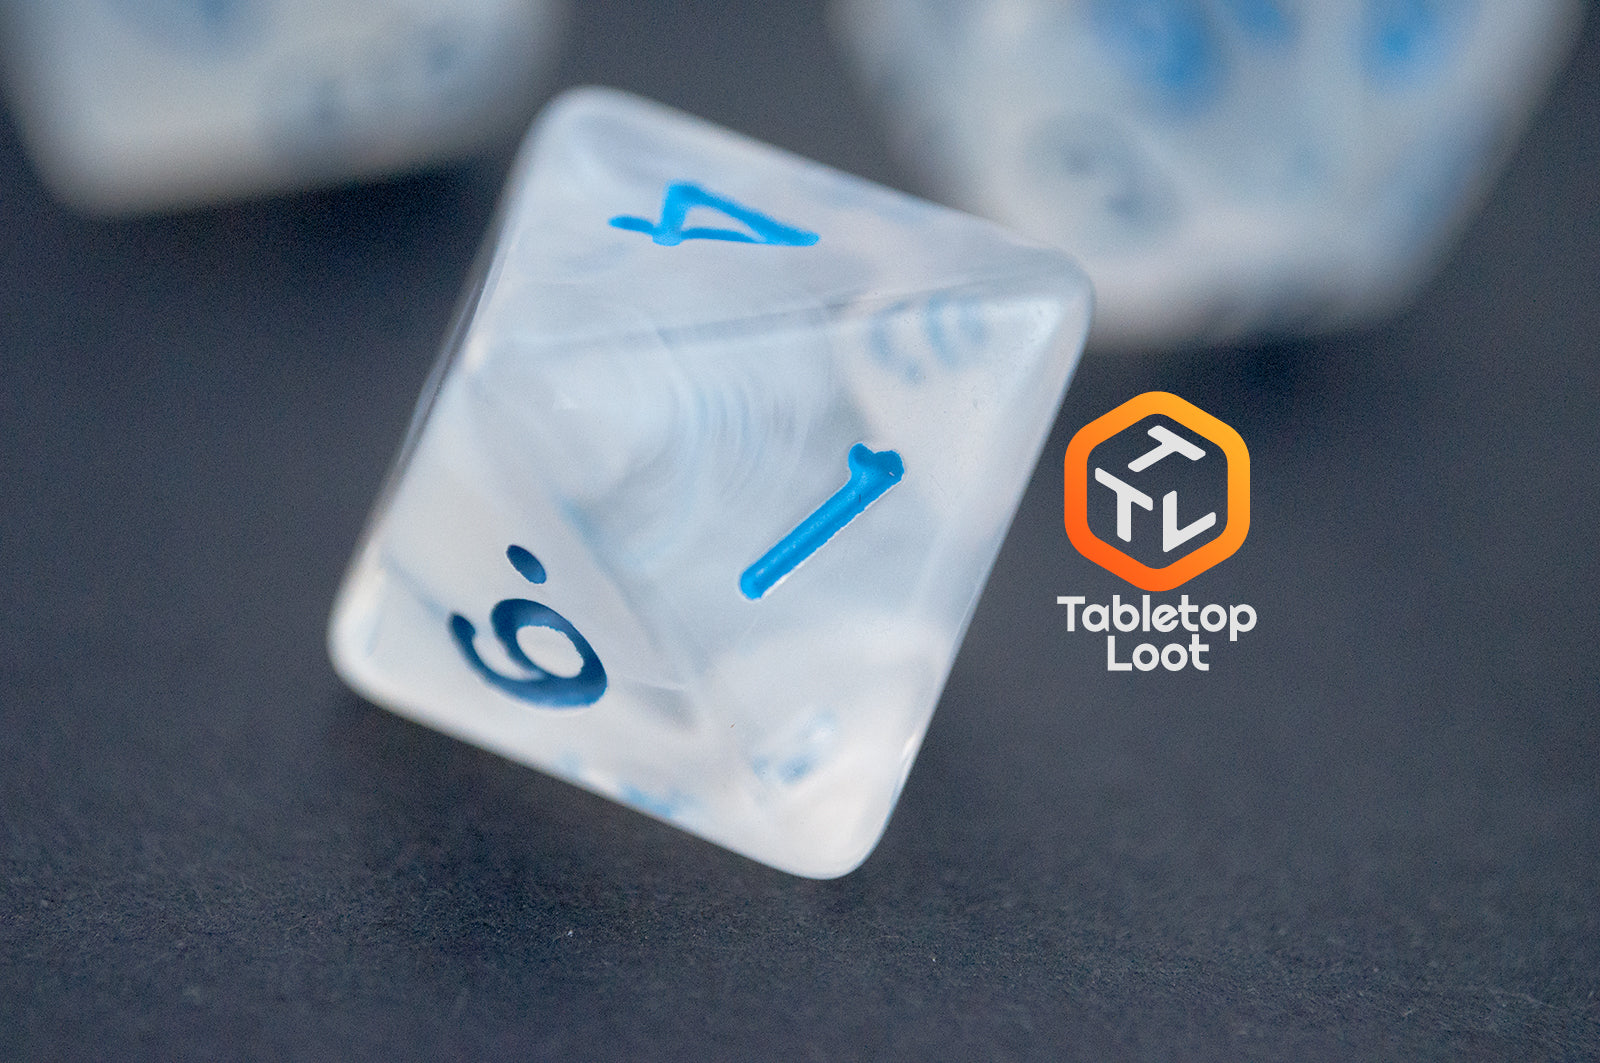 A close up of the D8 from the Dinneshere 7 piece dice set from Tabletop Loot with wispy white swirls and blue numbering.